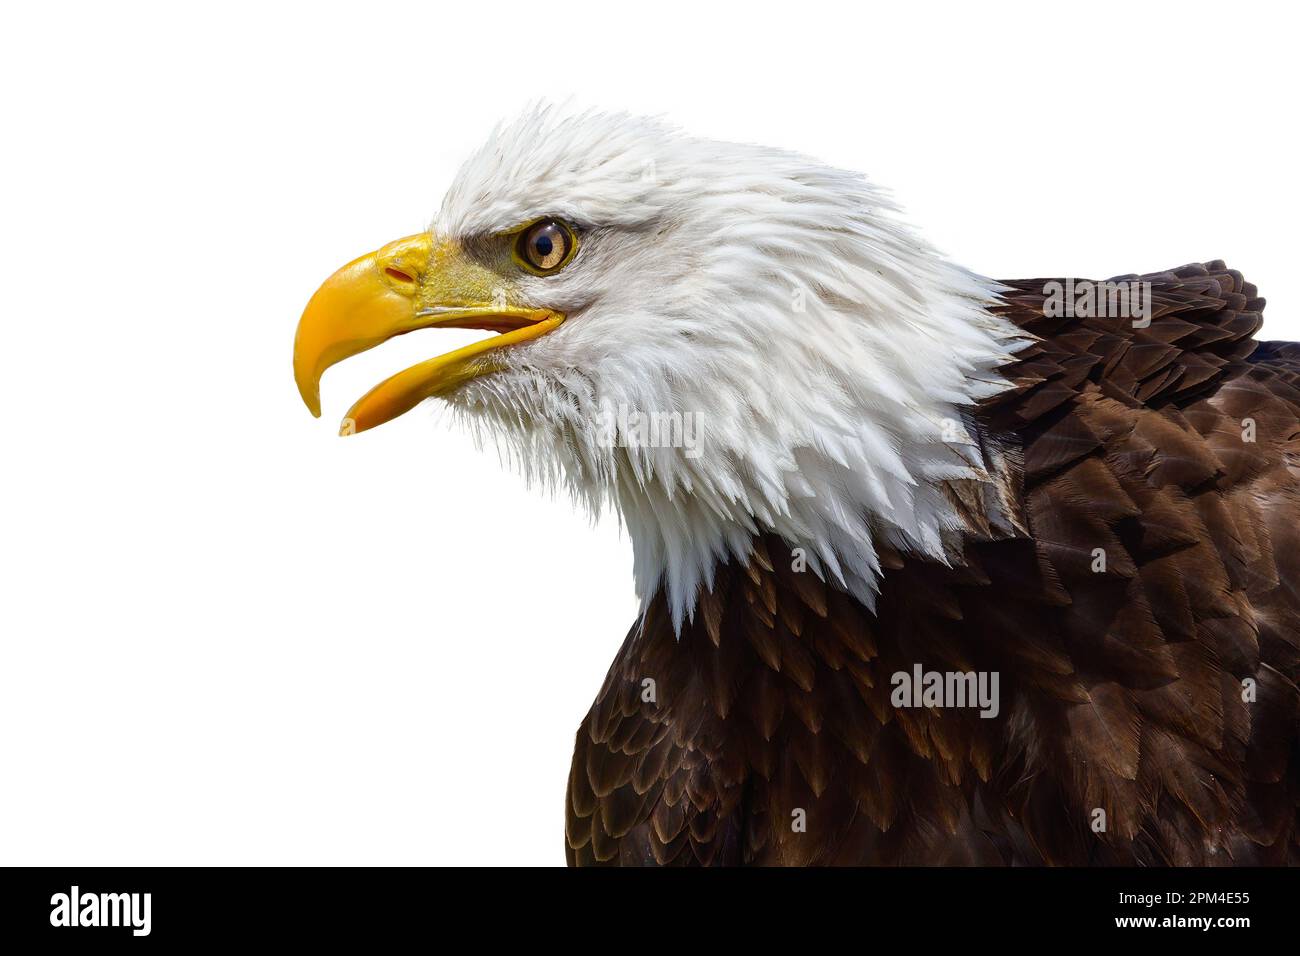 Bald eagle. Close up portrait of an eagle. American sea eagle. Bird of prey, isolated on white background with copy space. Stock Photo